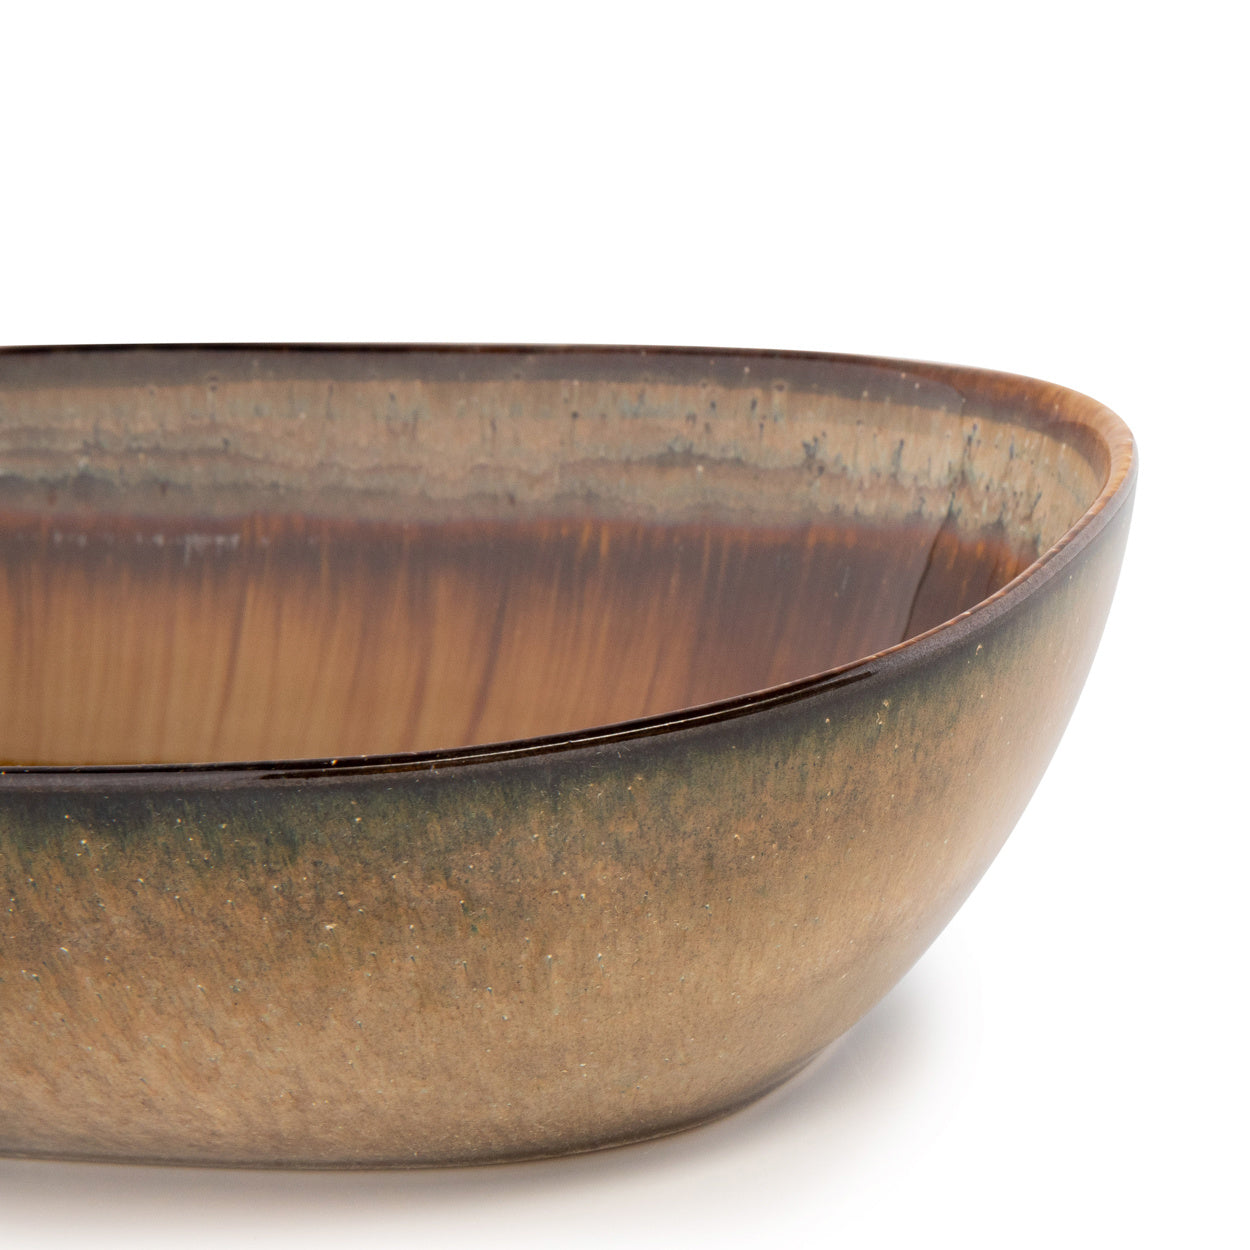 THE COMPORTA Oval Bowl Set of 4 detail side view